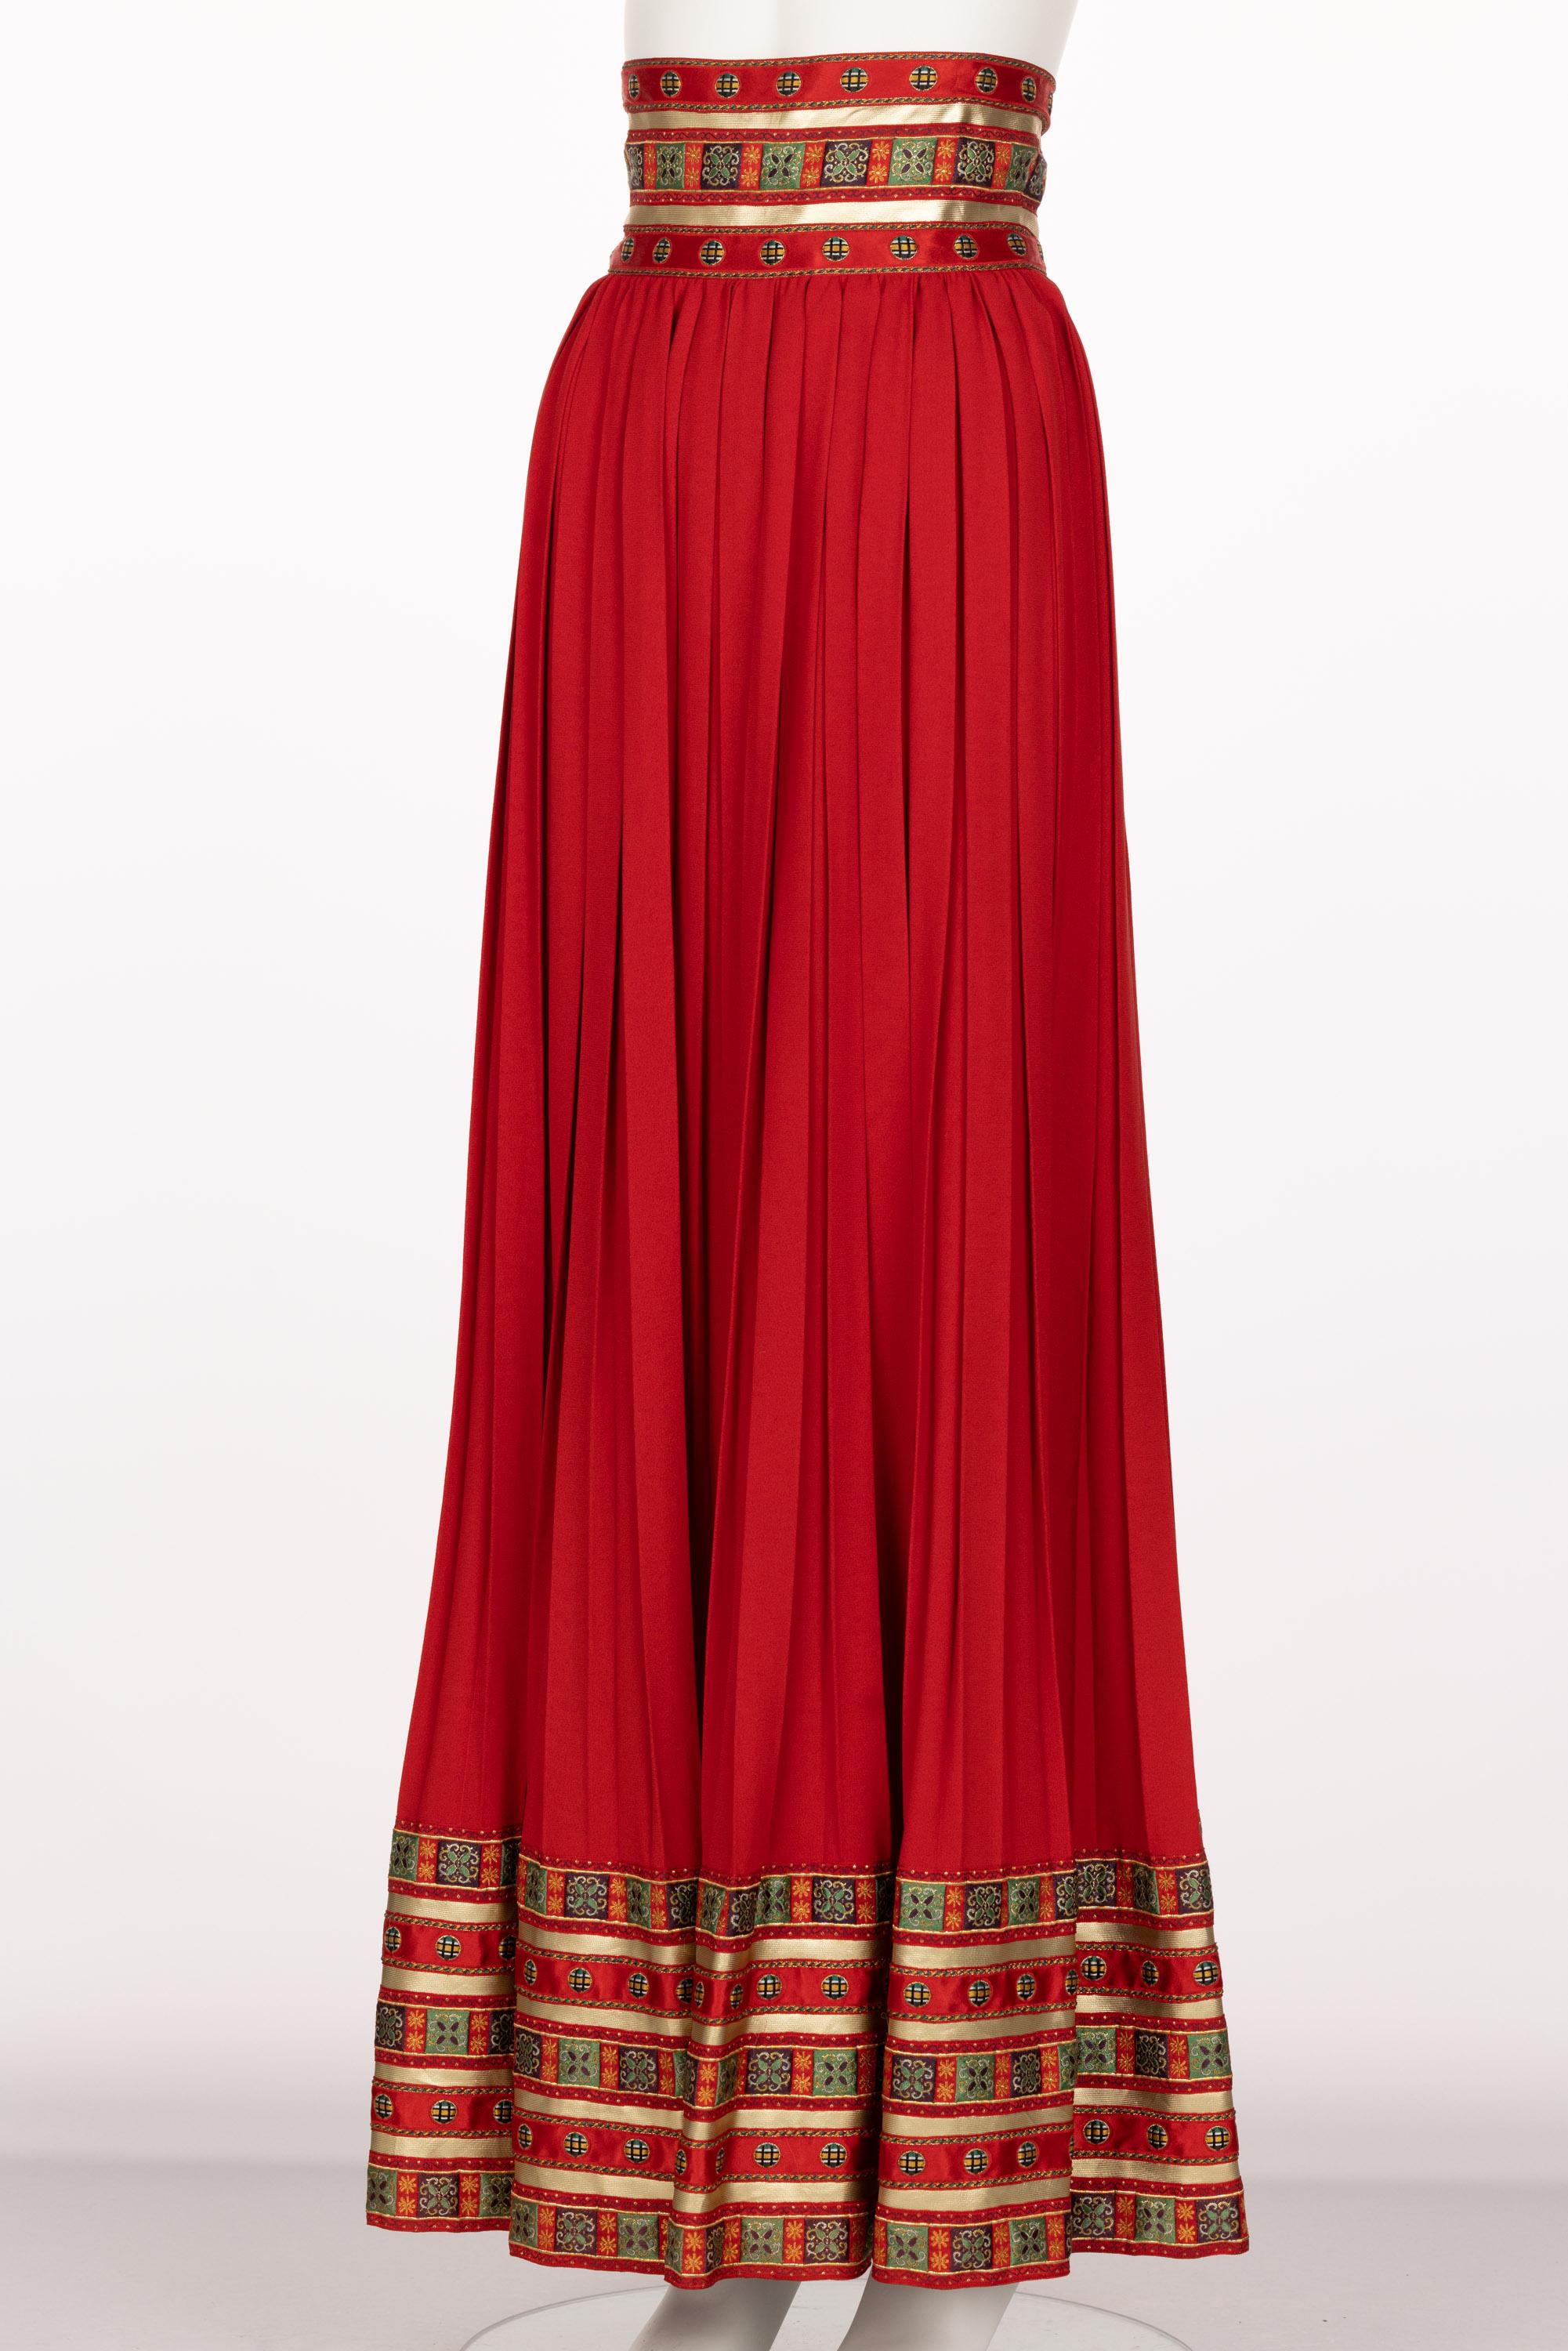 Lanvin Jules-François Crahay Demi Couture Red Pleated Brocade Maxi Skirt 1970s In Excellent Condition For Sale In Boca Raton, FL